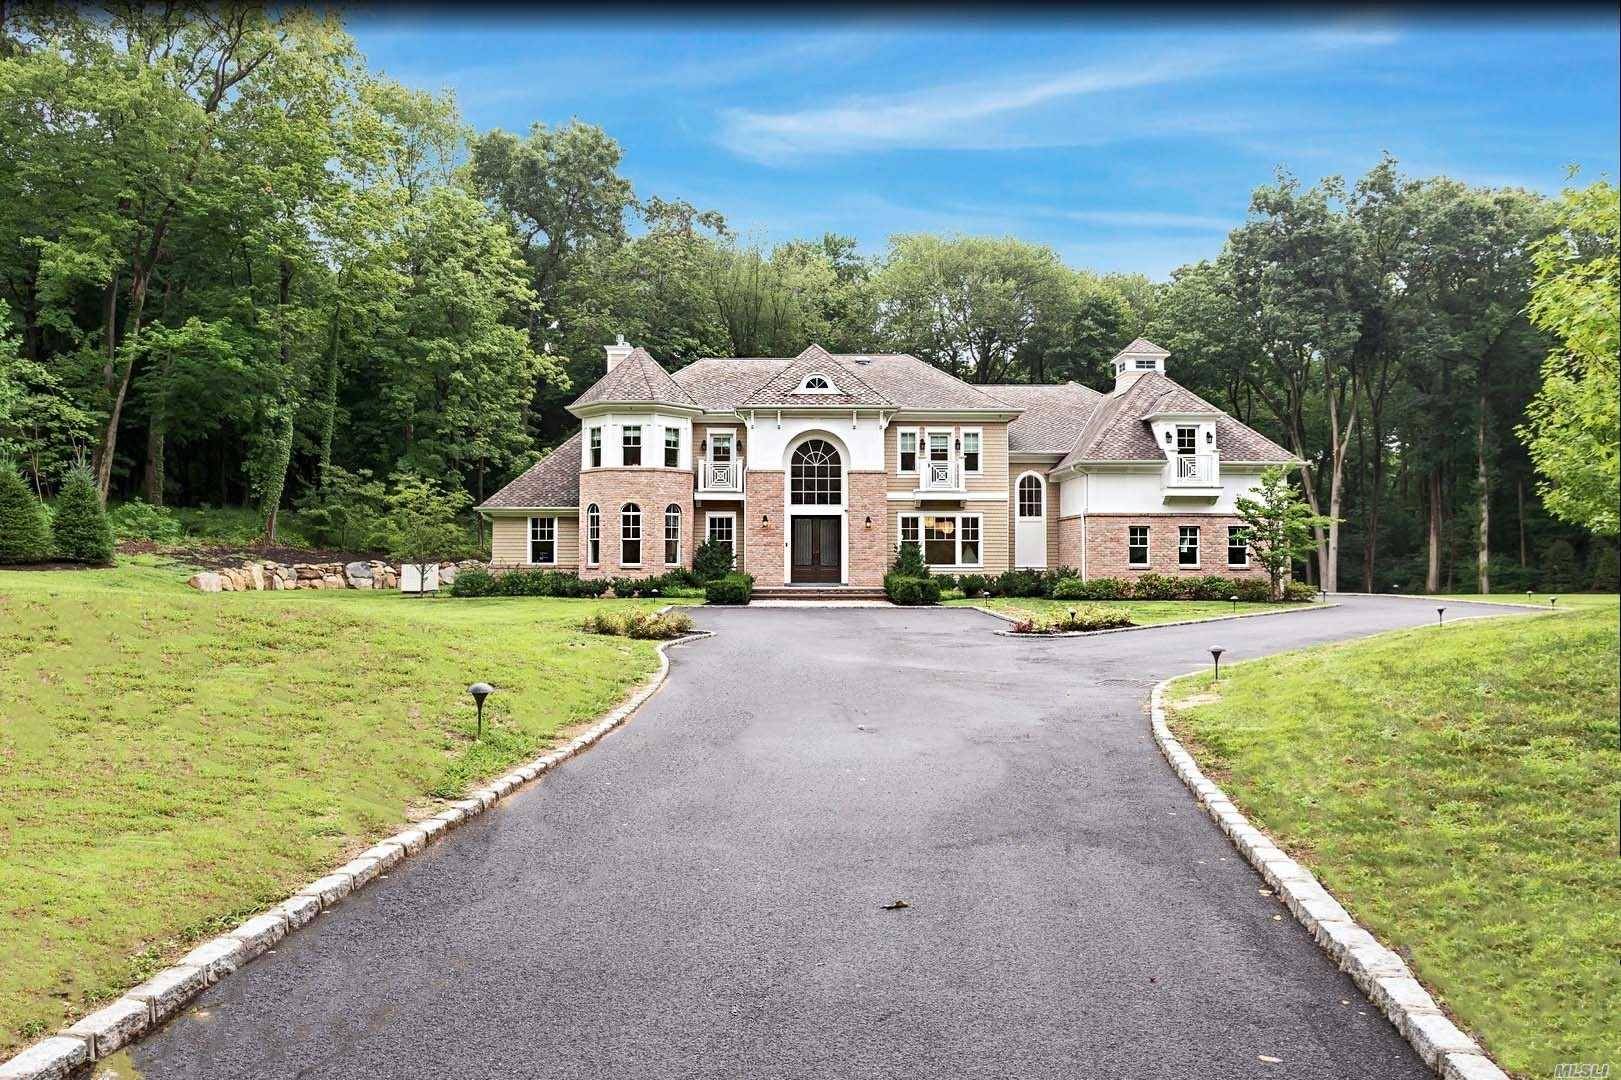 Brookville. Spectacular Newly Constructed Brick amp ; Shingle Colonial Featuring the Highest Quality Construction with Fantastic Modern amp ; Transitional Design.